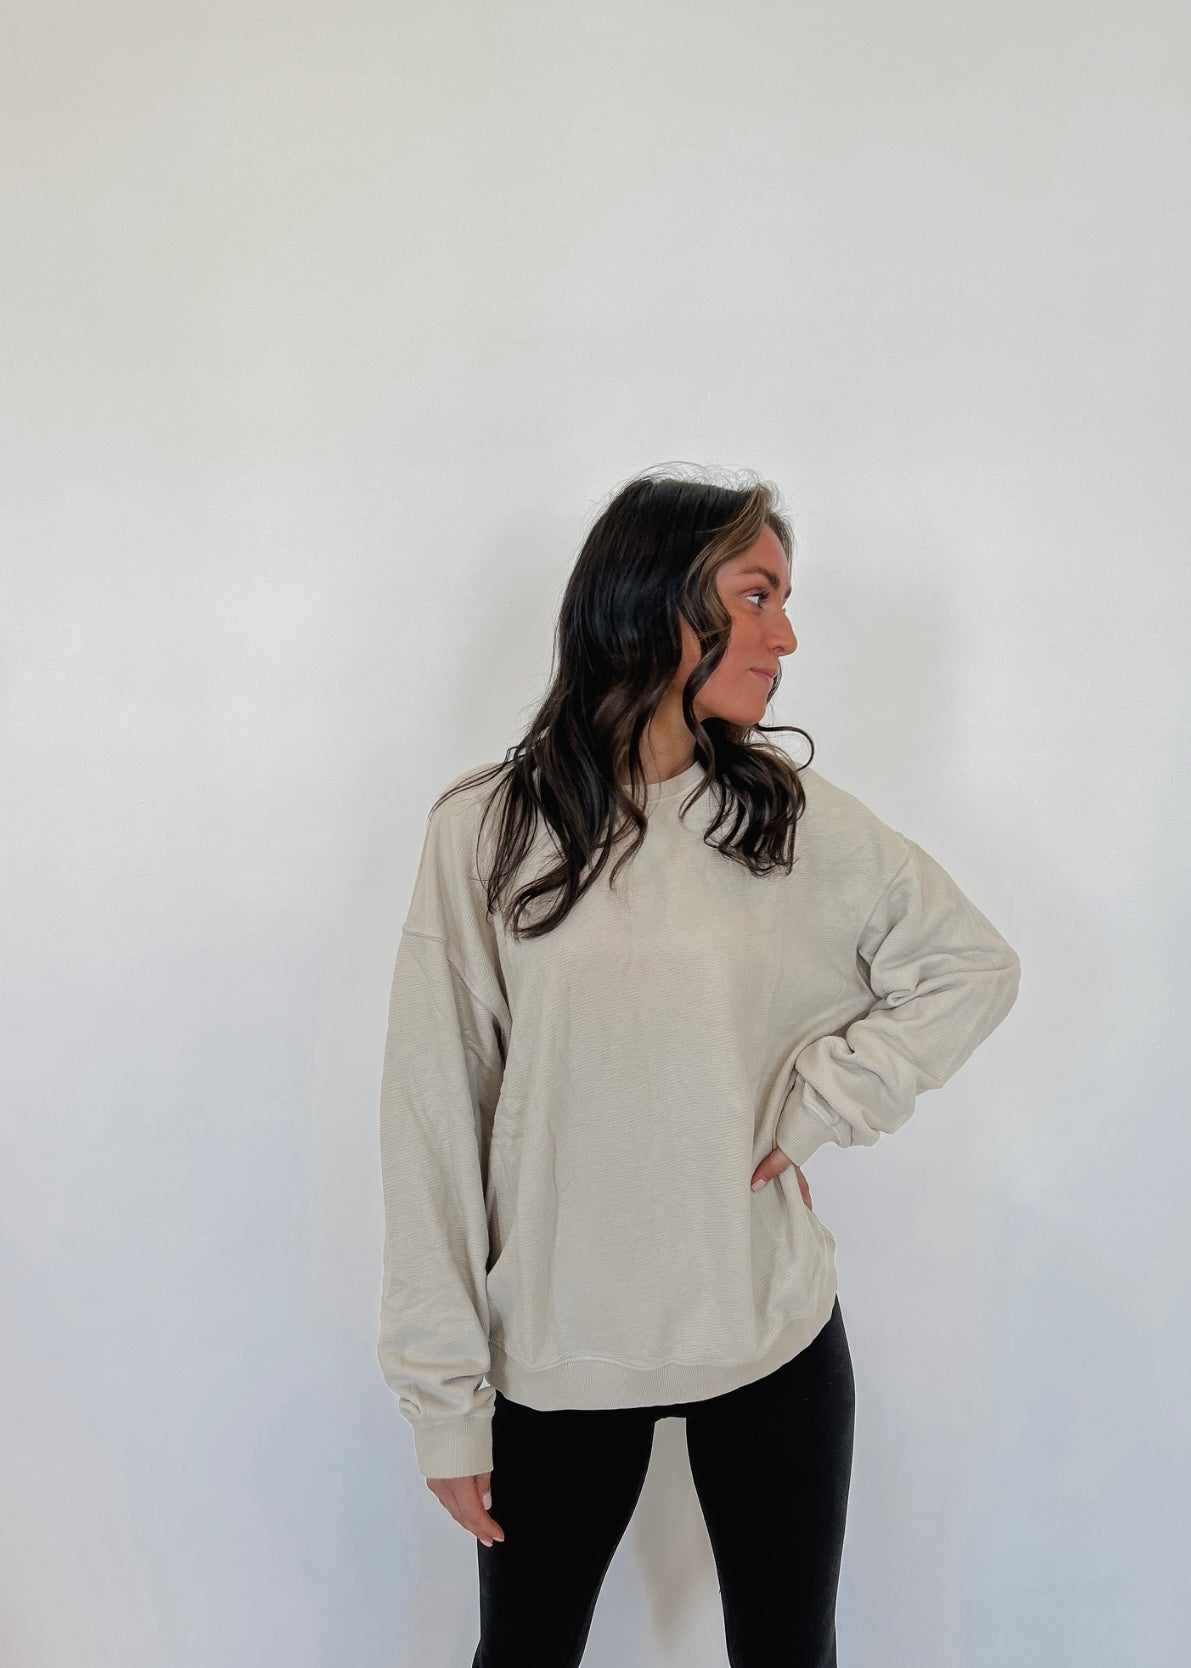 Mineral Washed jacquard Pullover - TAUPE